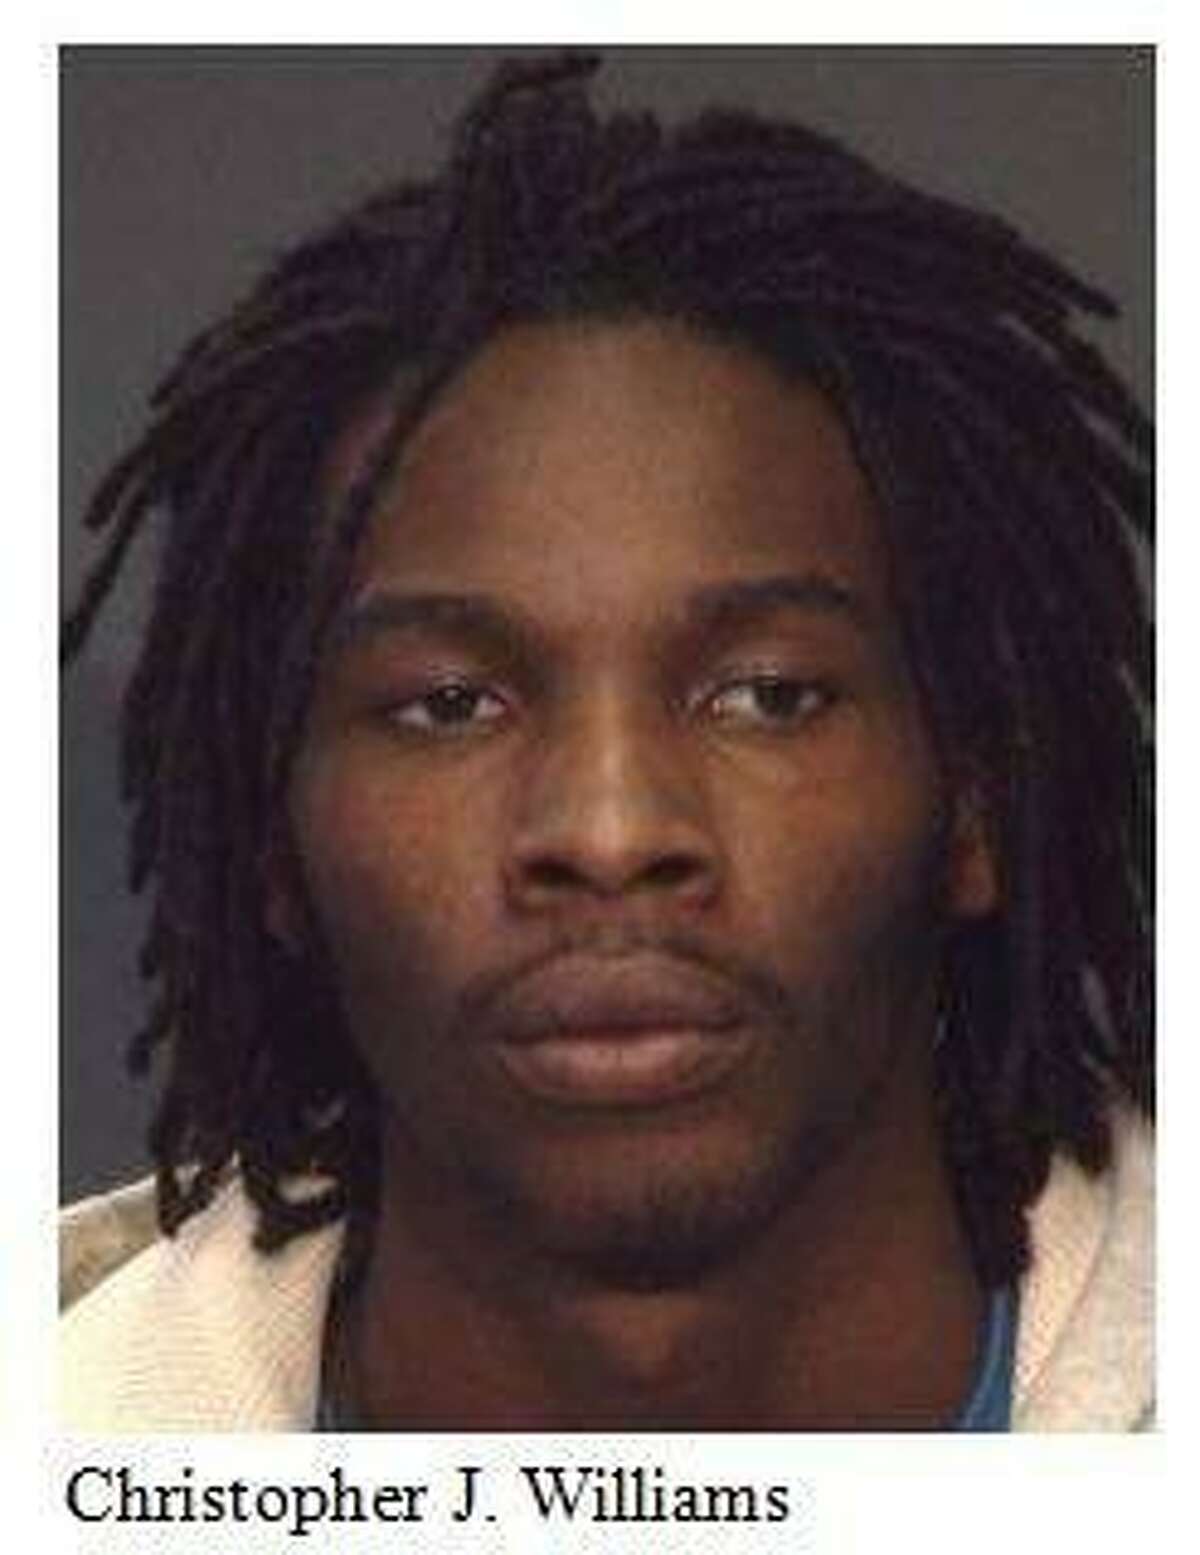 Escaped Stamford convict Christopher Williams, 22, was captured at a residence on Myano Lane on Tuesday in Stamford.